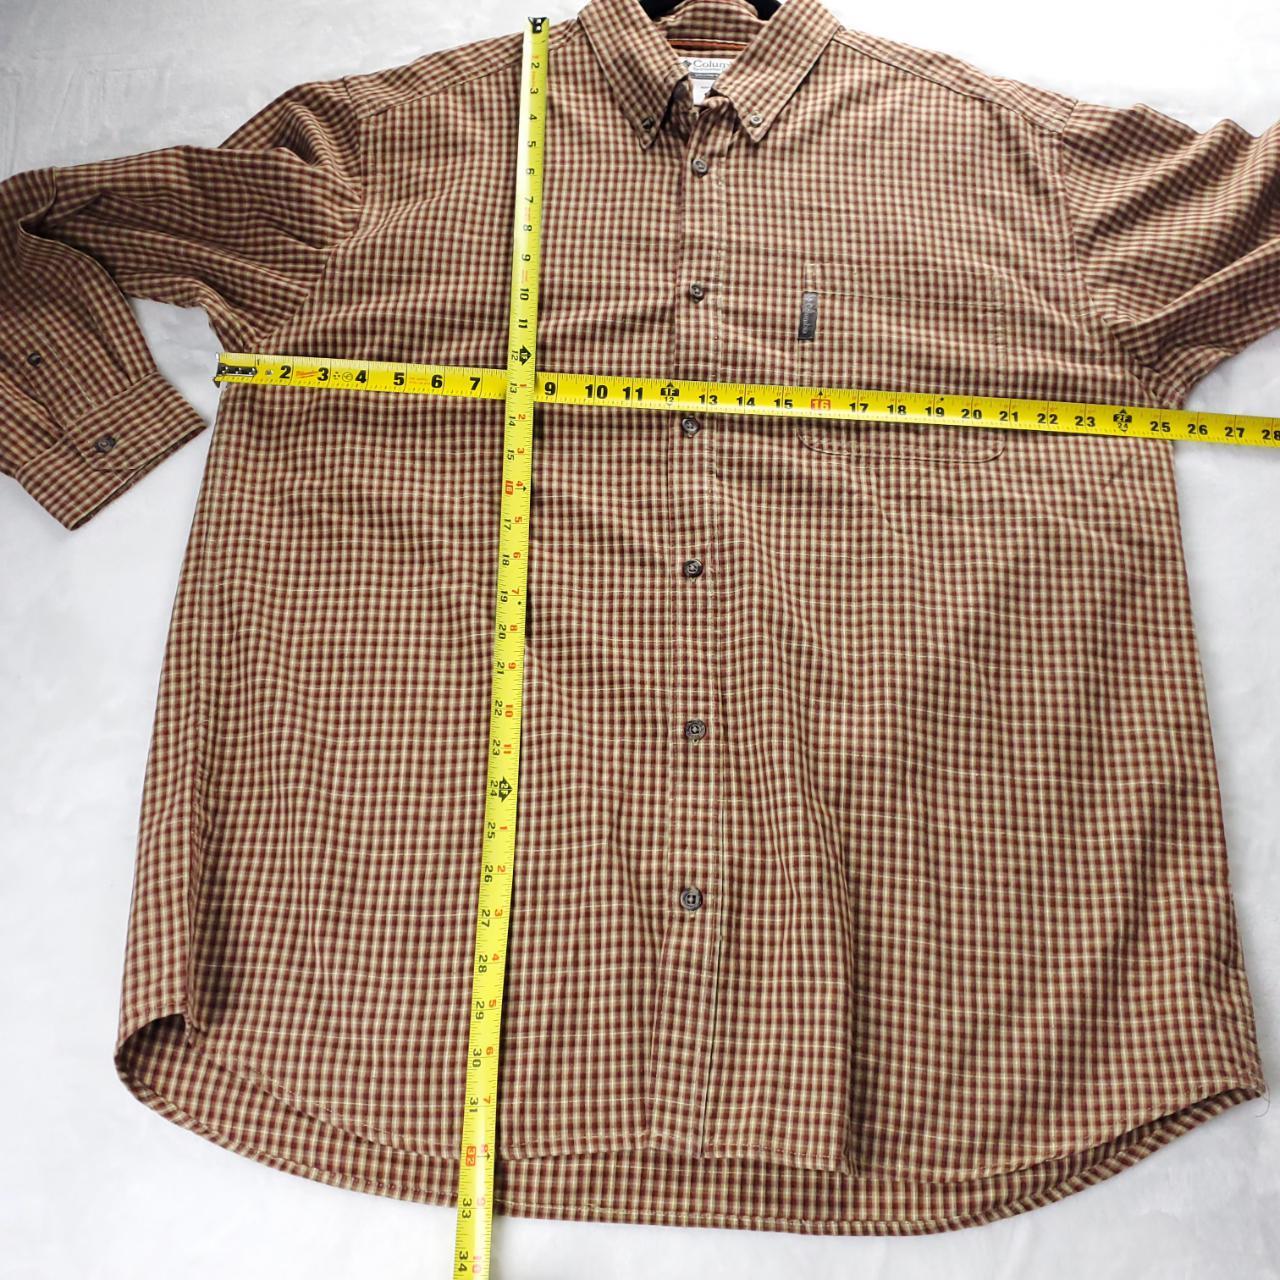 Product Image 4 - VINTAGE Columbia Sportswear Button Shirt